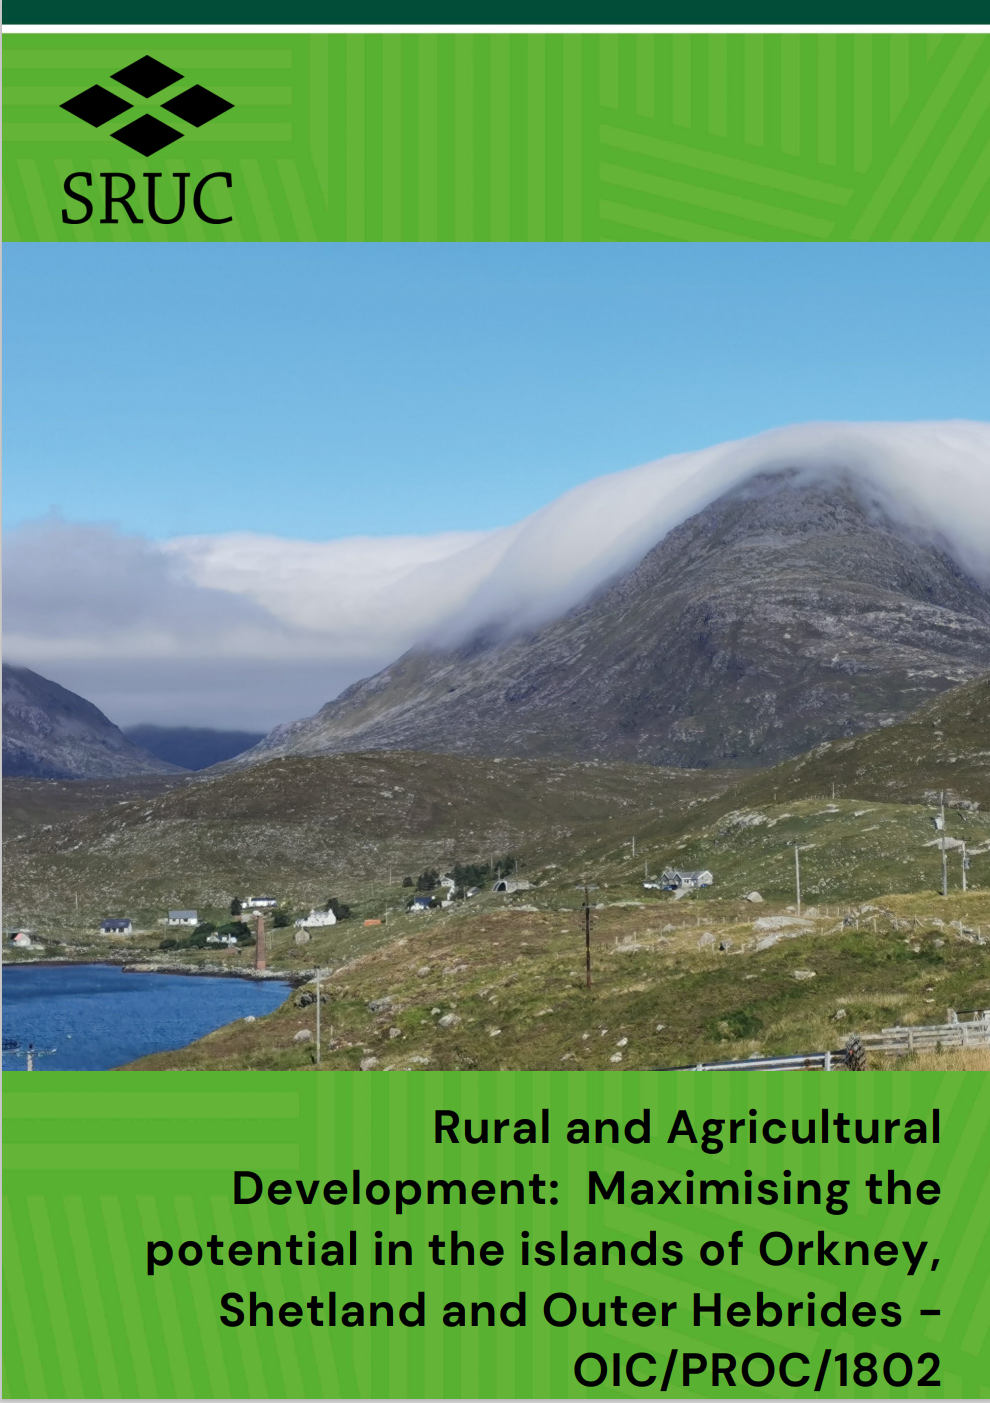 Rural and Agricultural Development Maximising the potential in the islands of Orkney, Shetland and Outer Hebrides